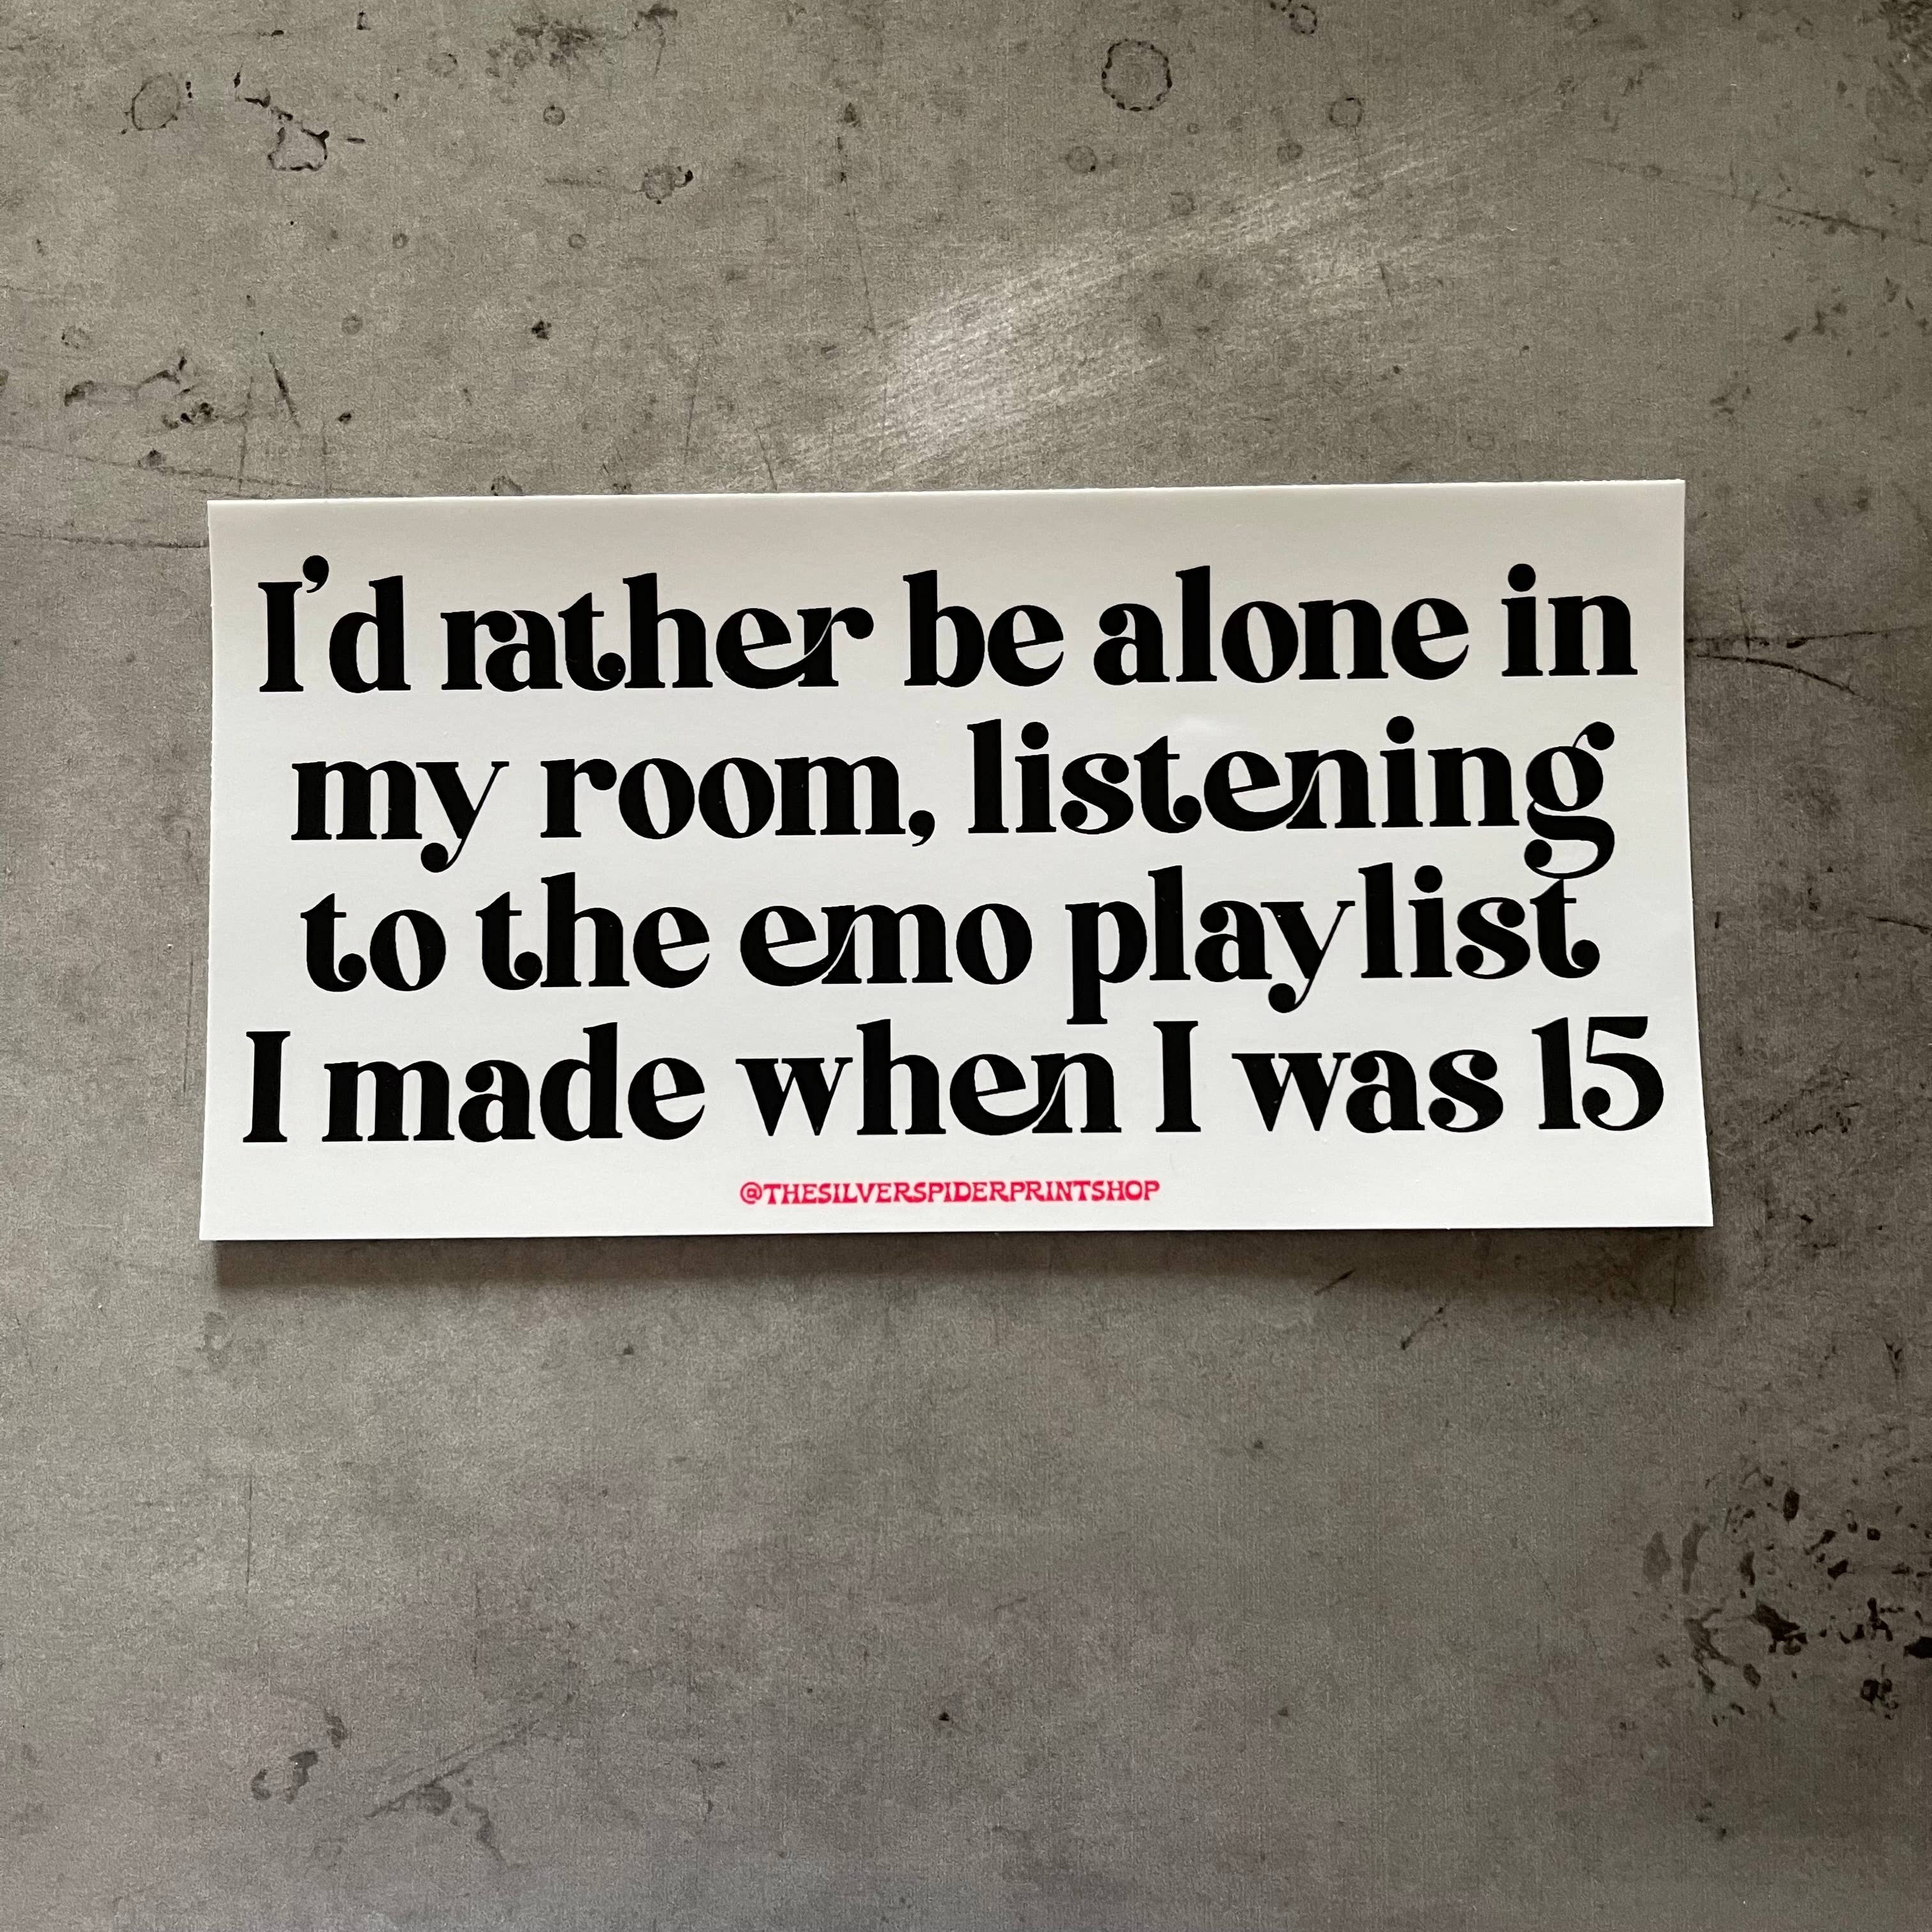 Rather be alone listening to emo playlist Bumper Sticker